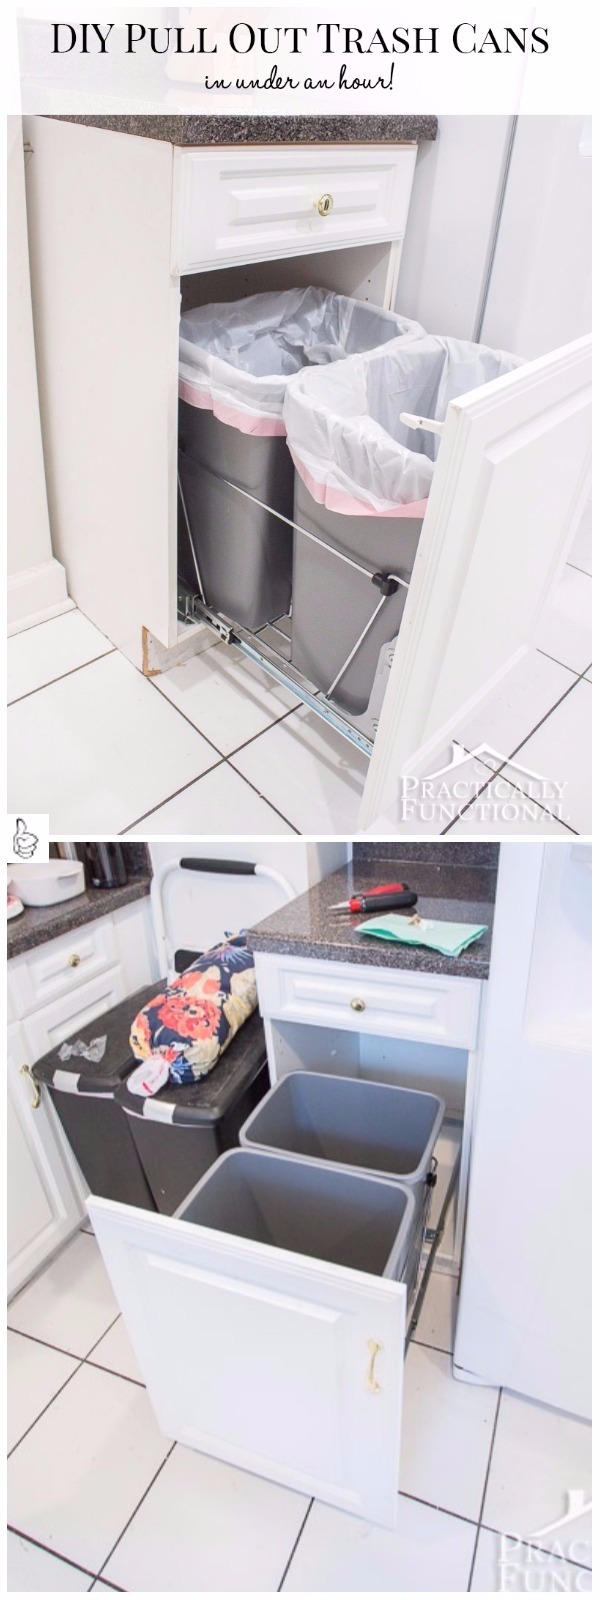 DIY Pull Out Trash Cans (in under an hour!) – Practically Functional